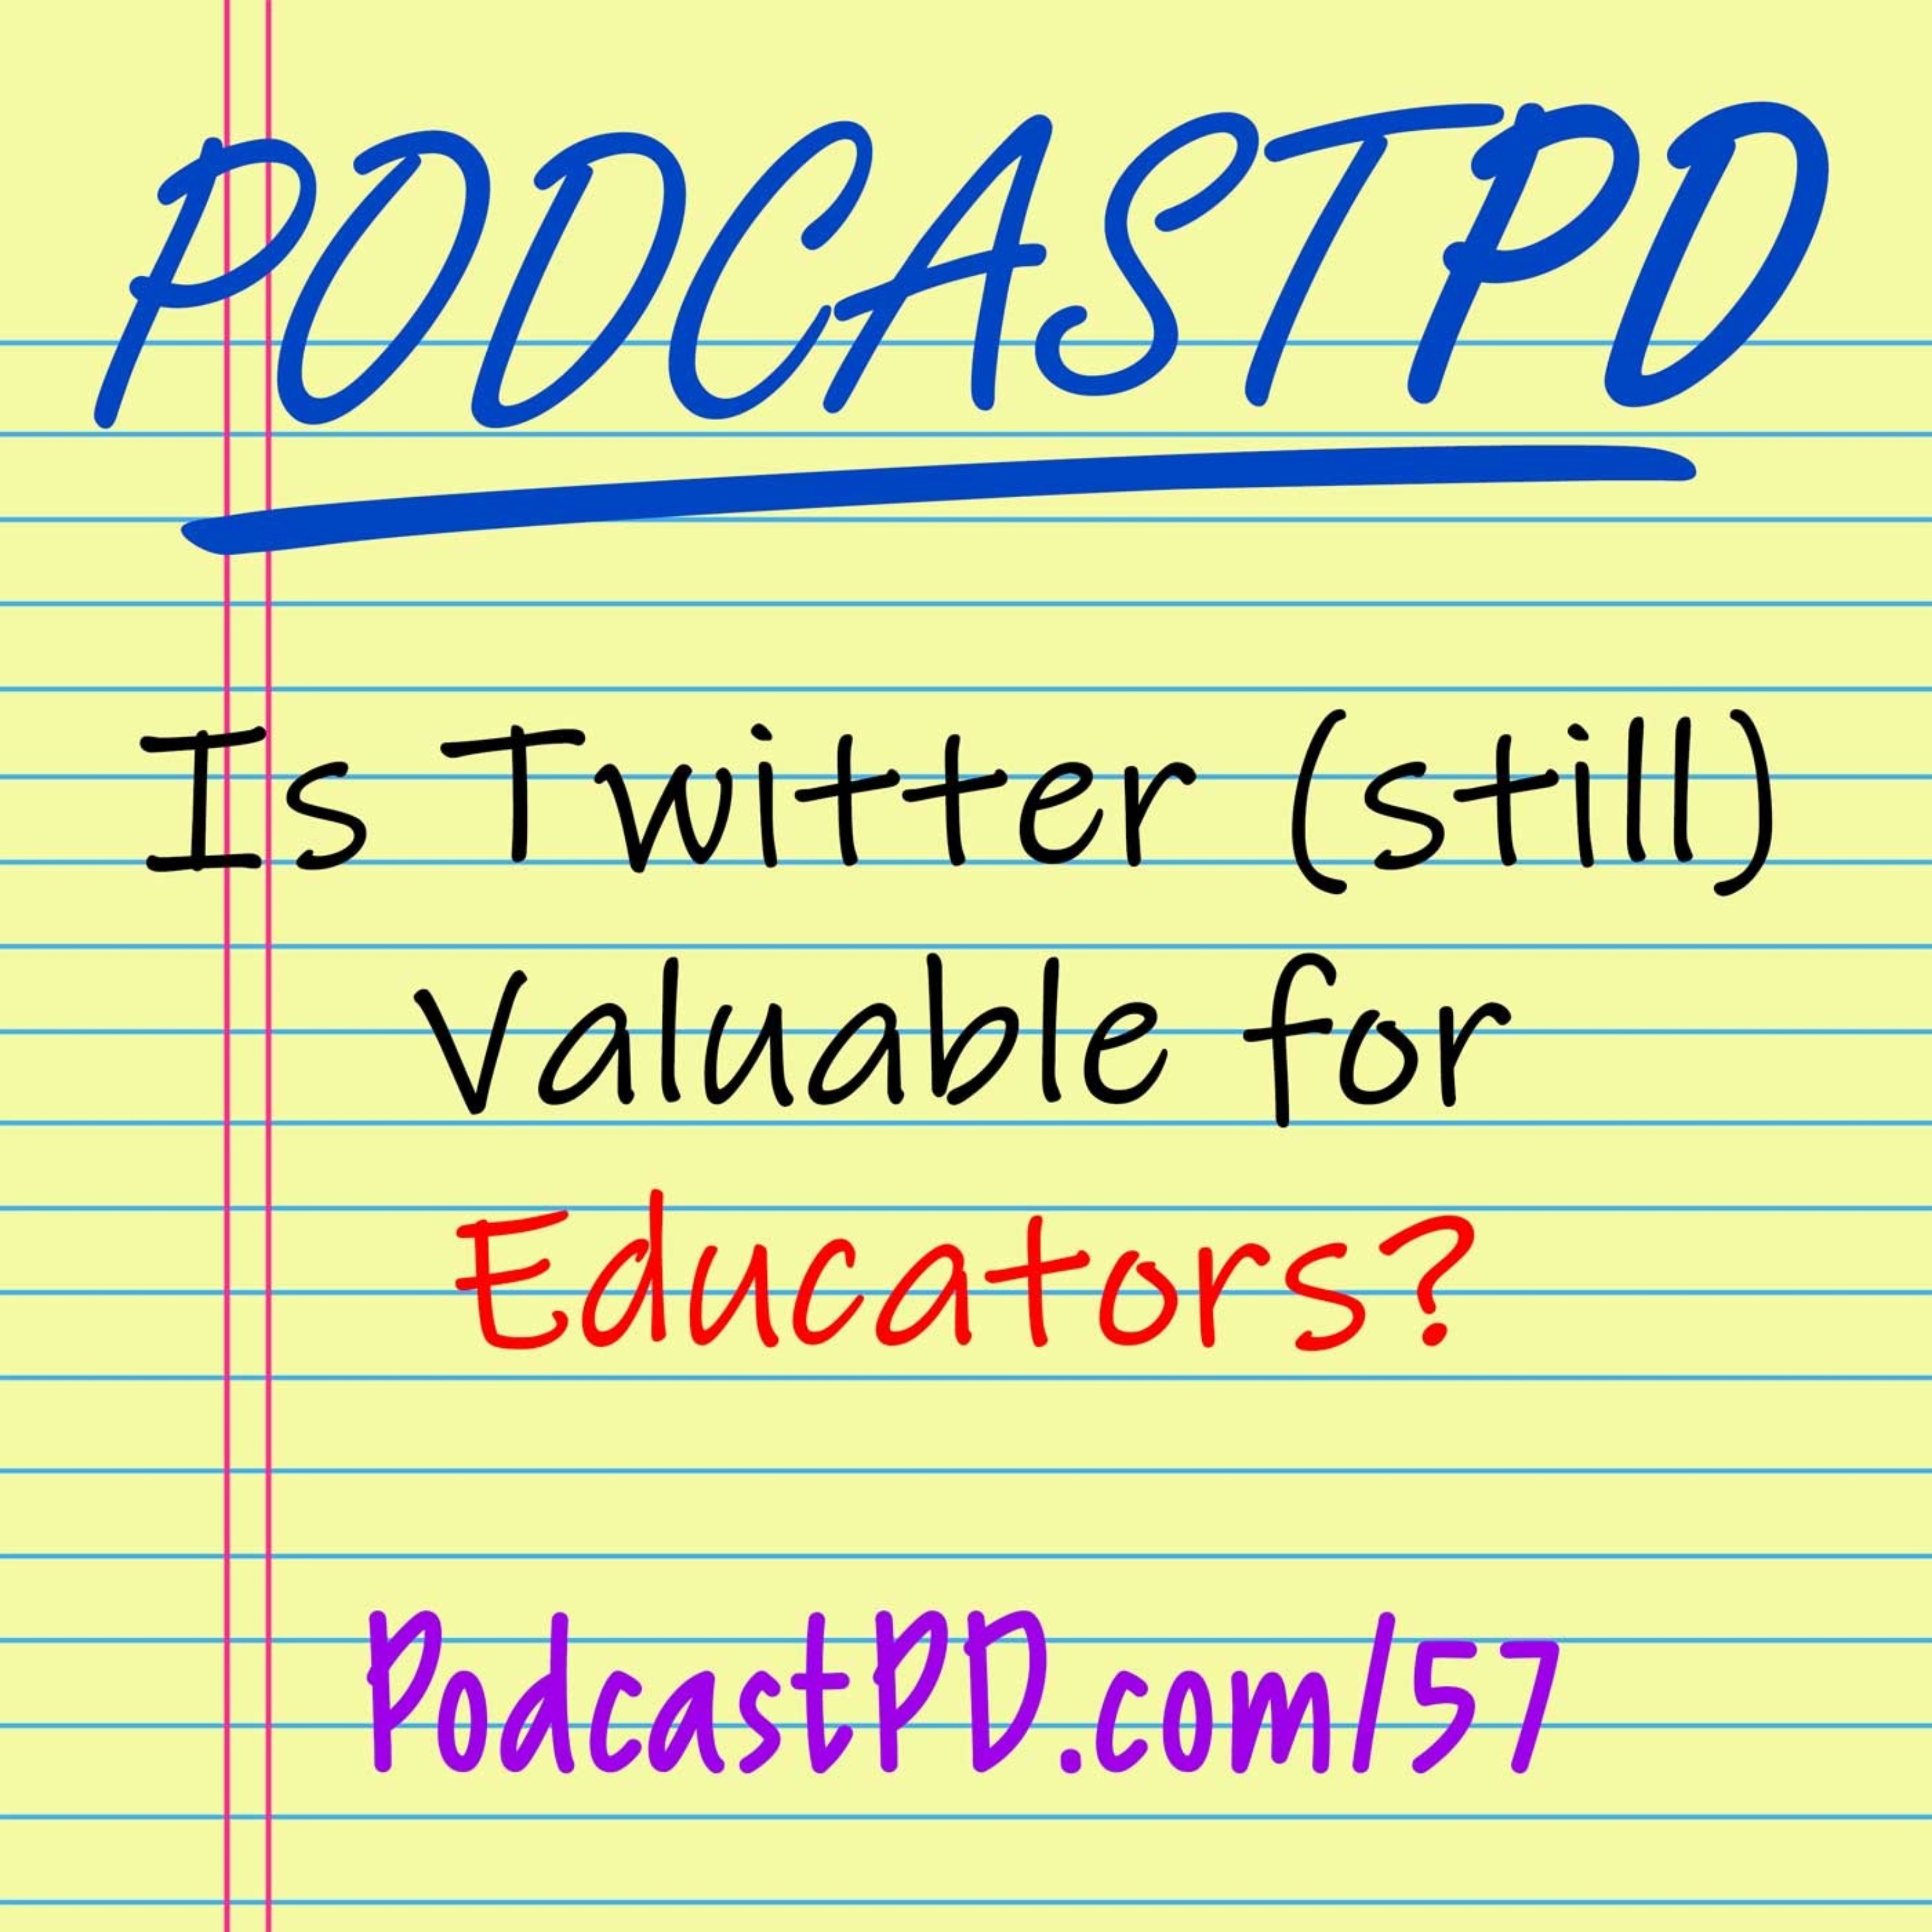 Is Twitter (still) Valuable for Educators? - PPD057 Image